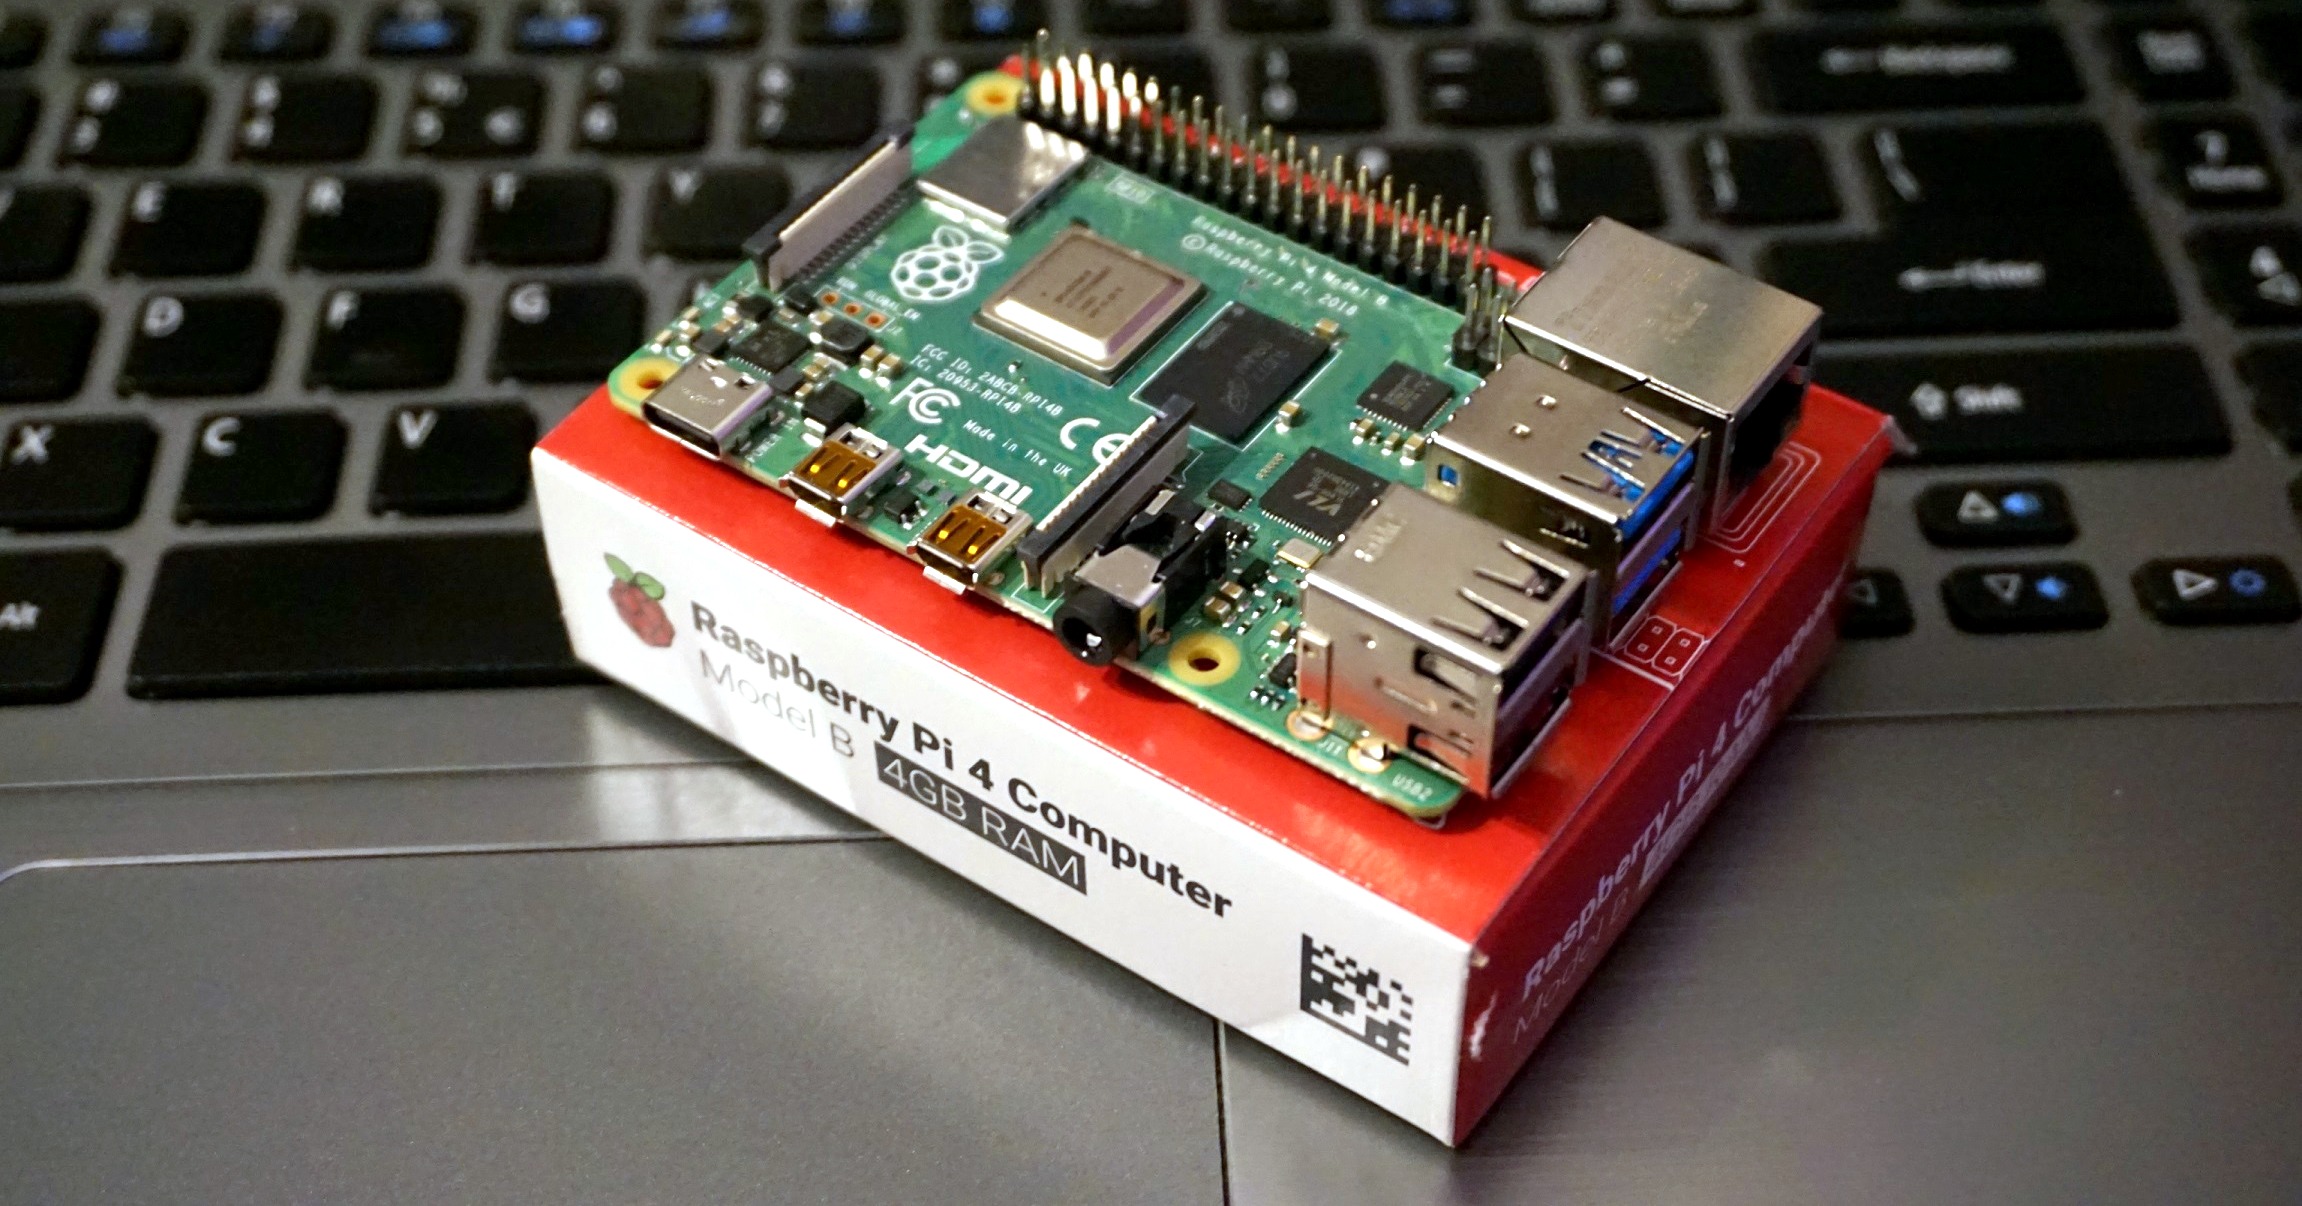 Getting Started With the Raspberry Pi